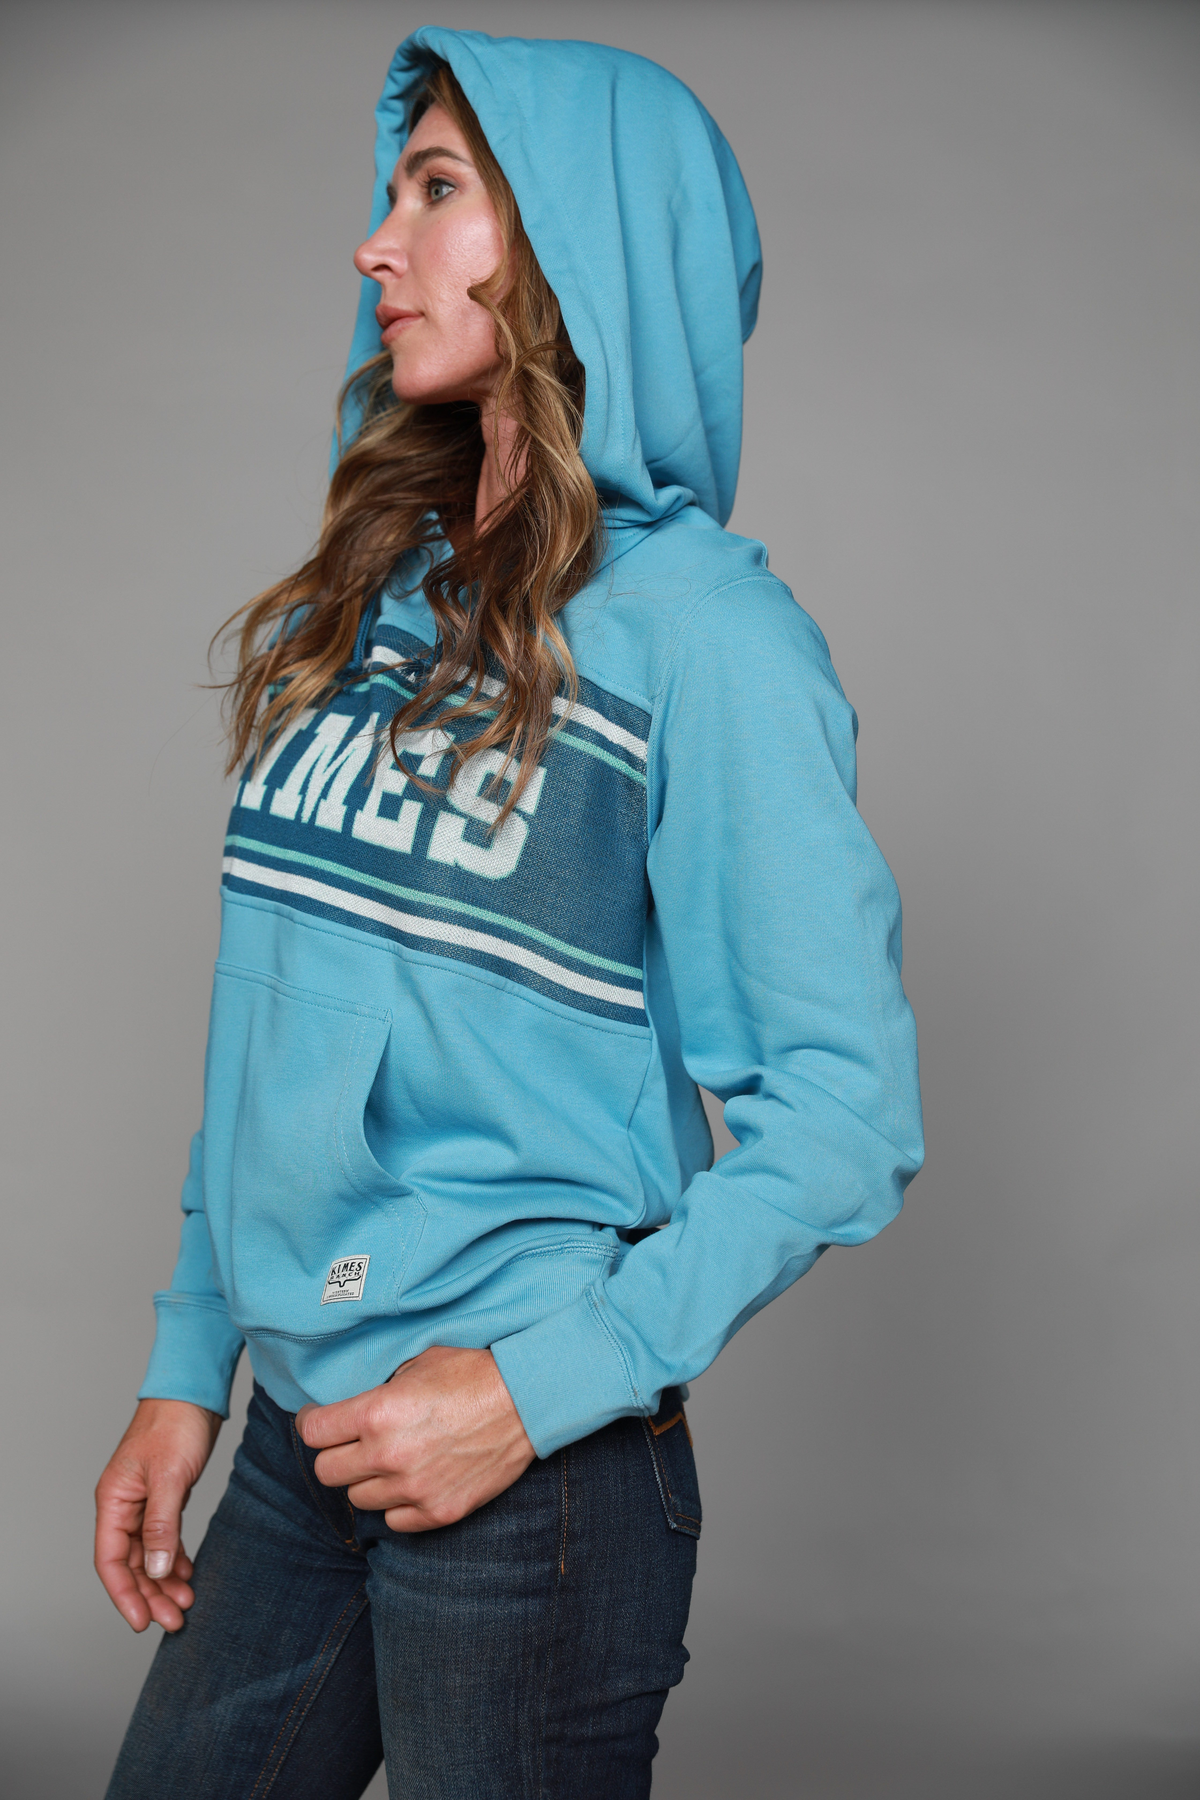 Kimes Ranch Hoodie - North Star Turquoise